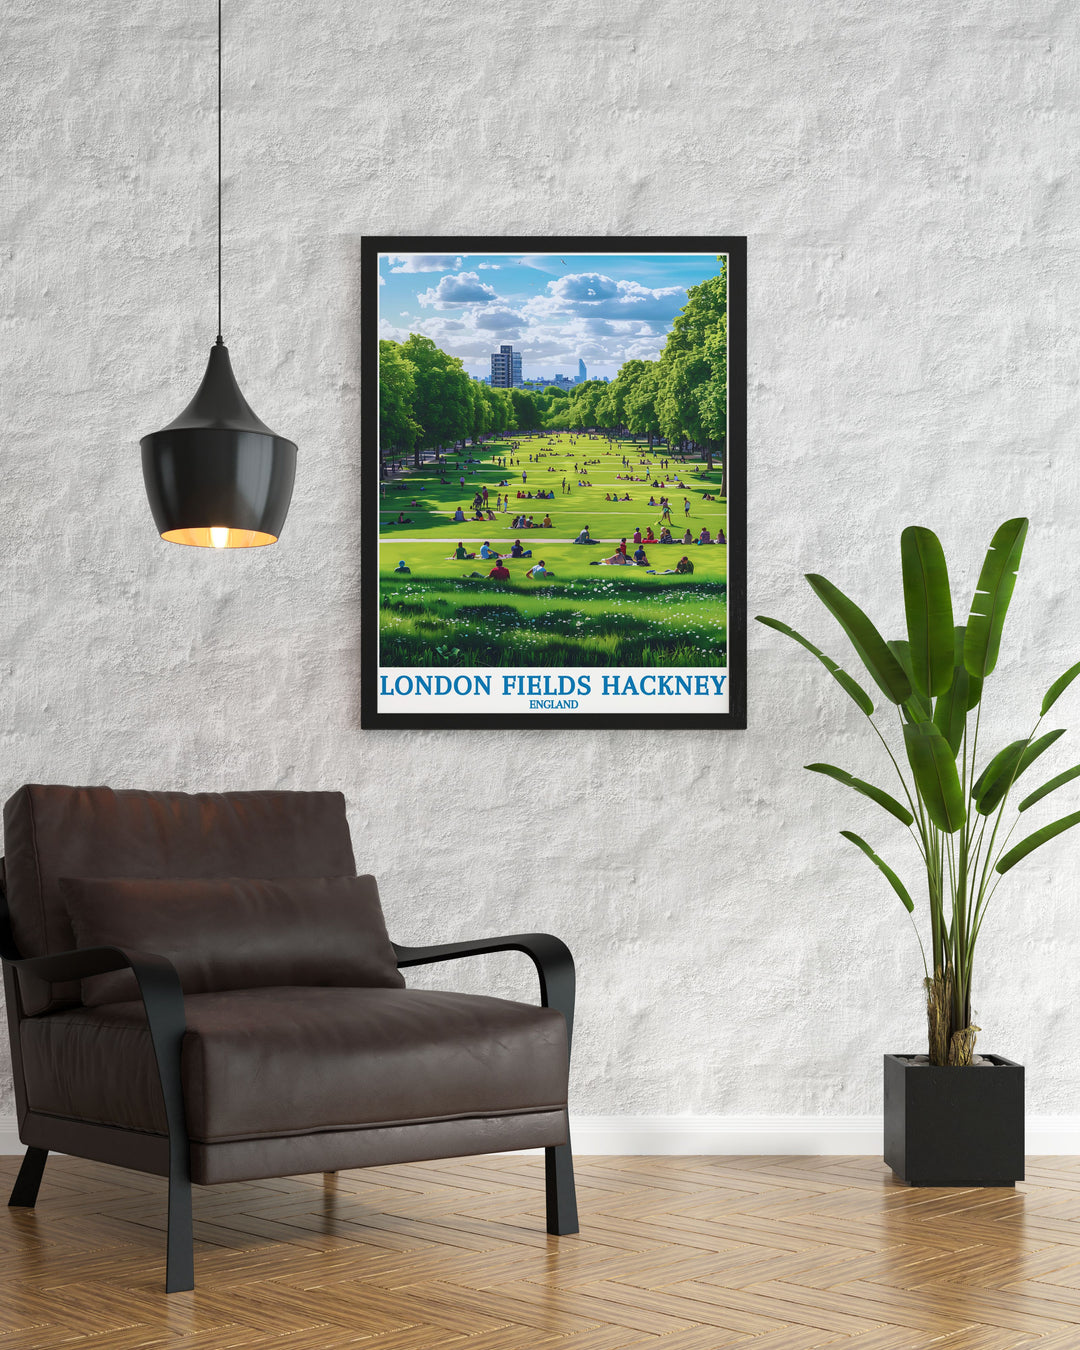 Featuring the scenic paths and historic features of London Fields, this poster showcases the parks inviting landscapes, perfect for those who cherish urban green spaces.